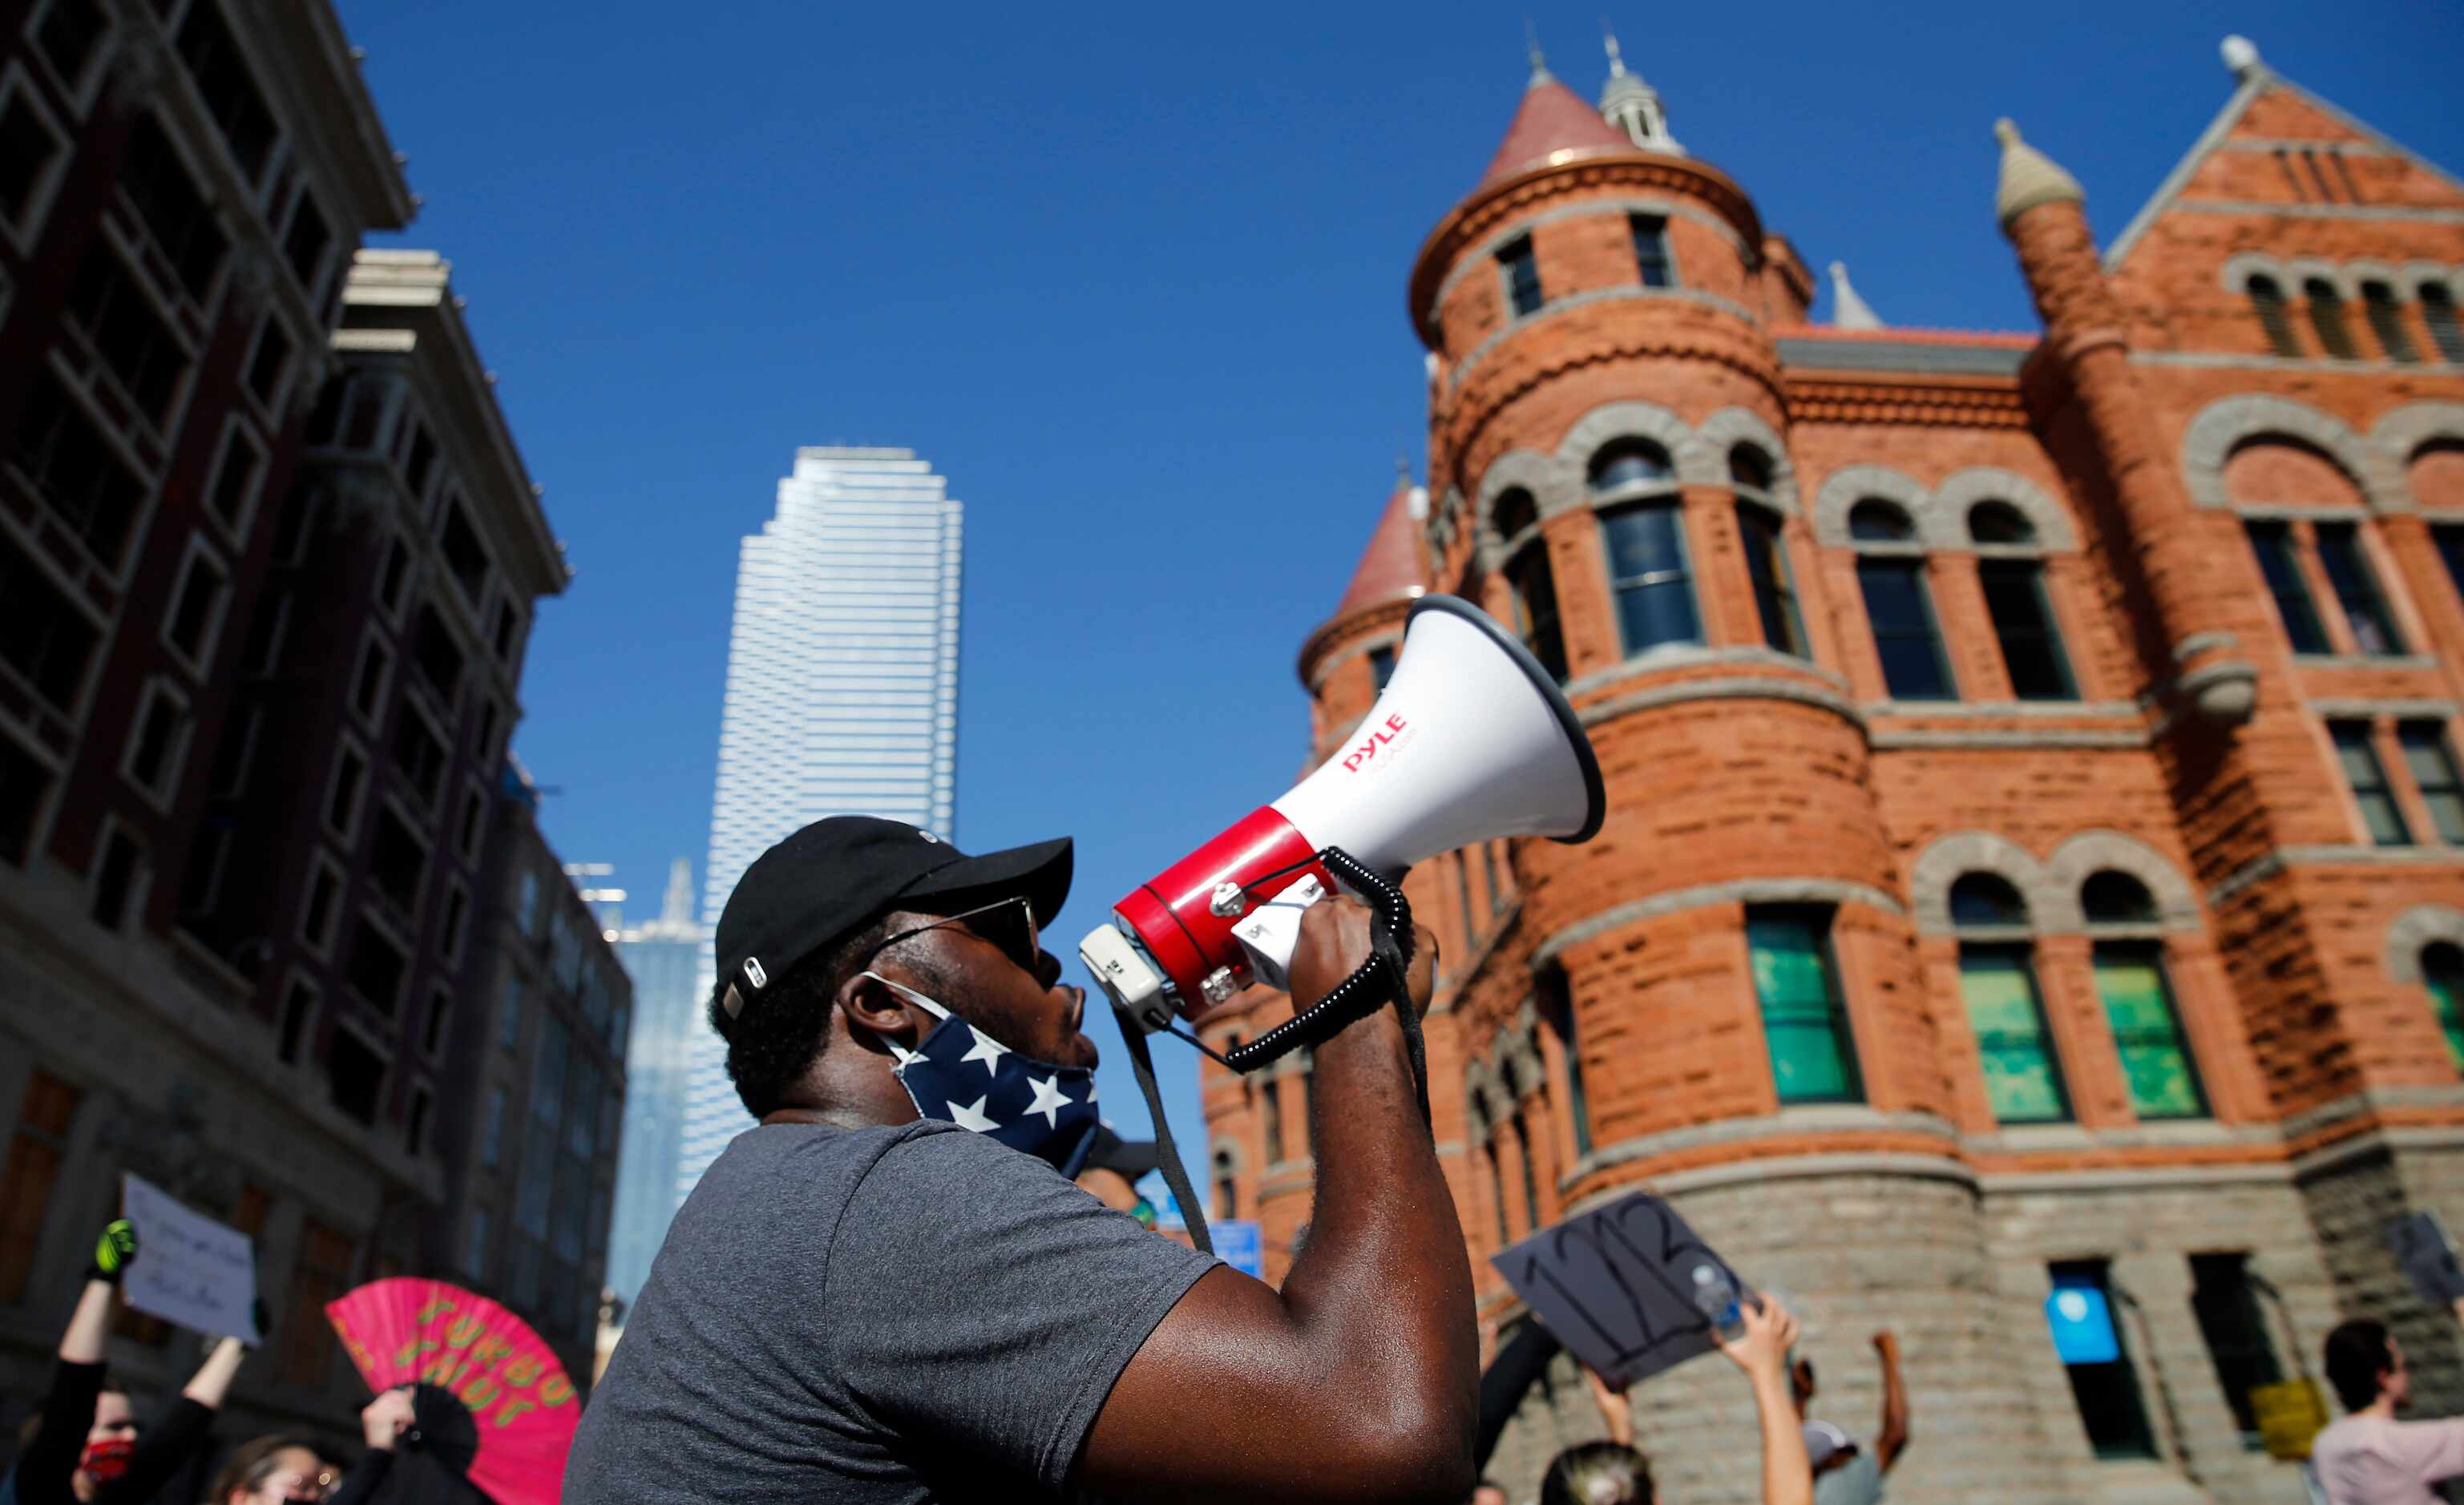 With his bullhorn, Edmund Simpson II of Dallas leads protestors in a chant as the group...